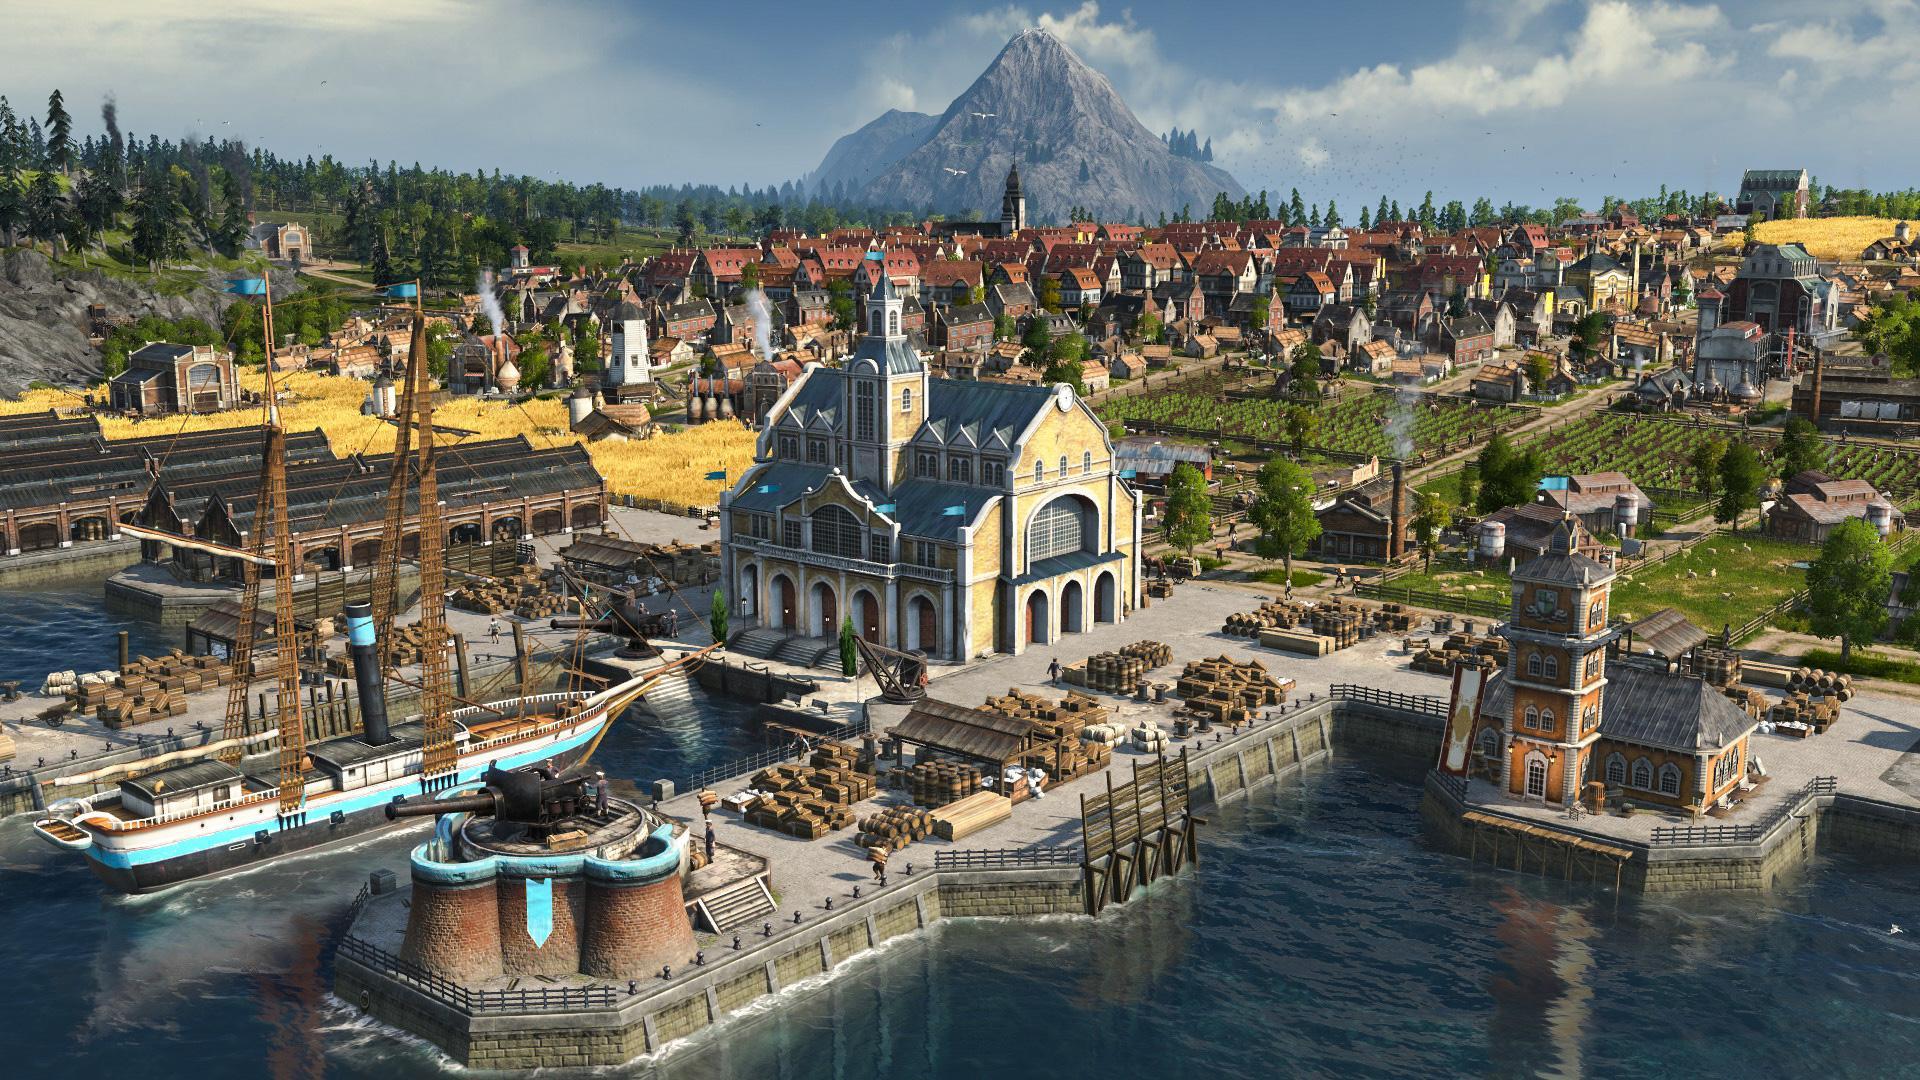 Anno 1800 is a beauty!